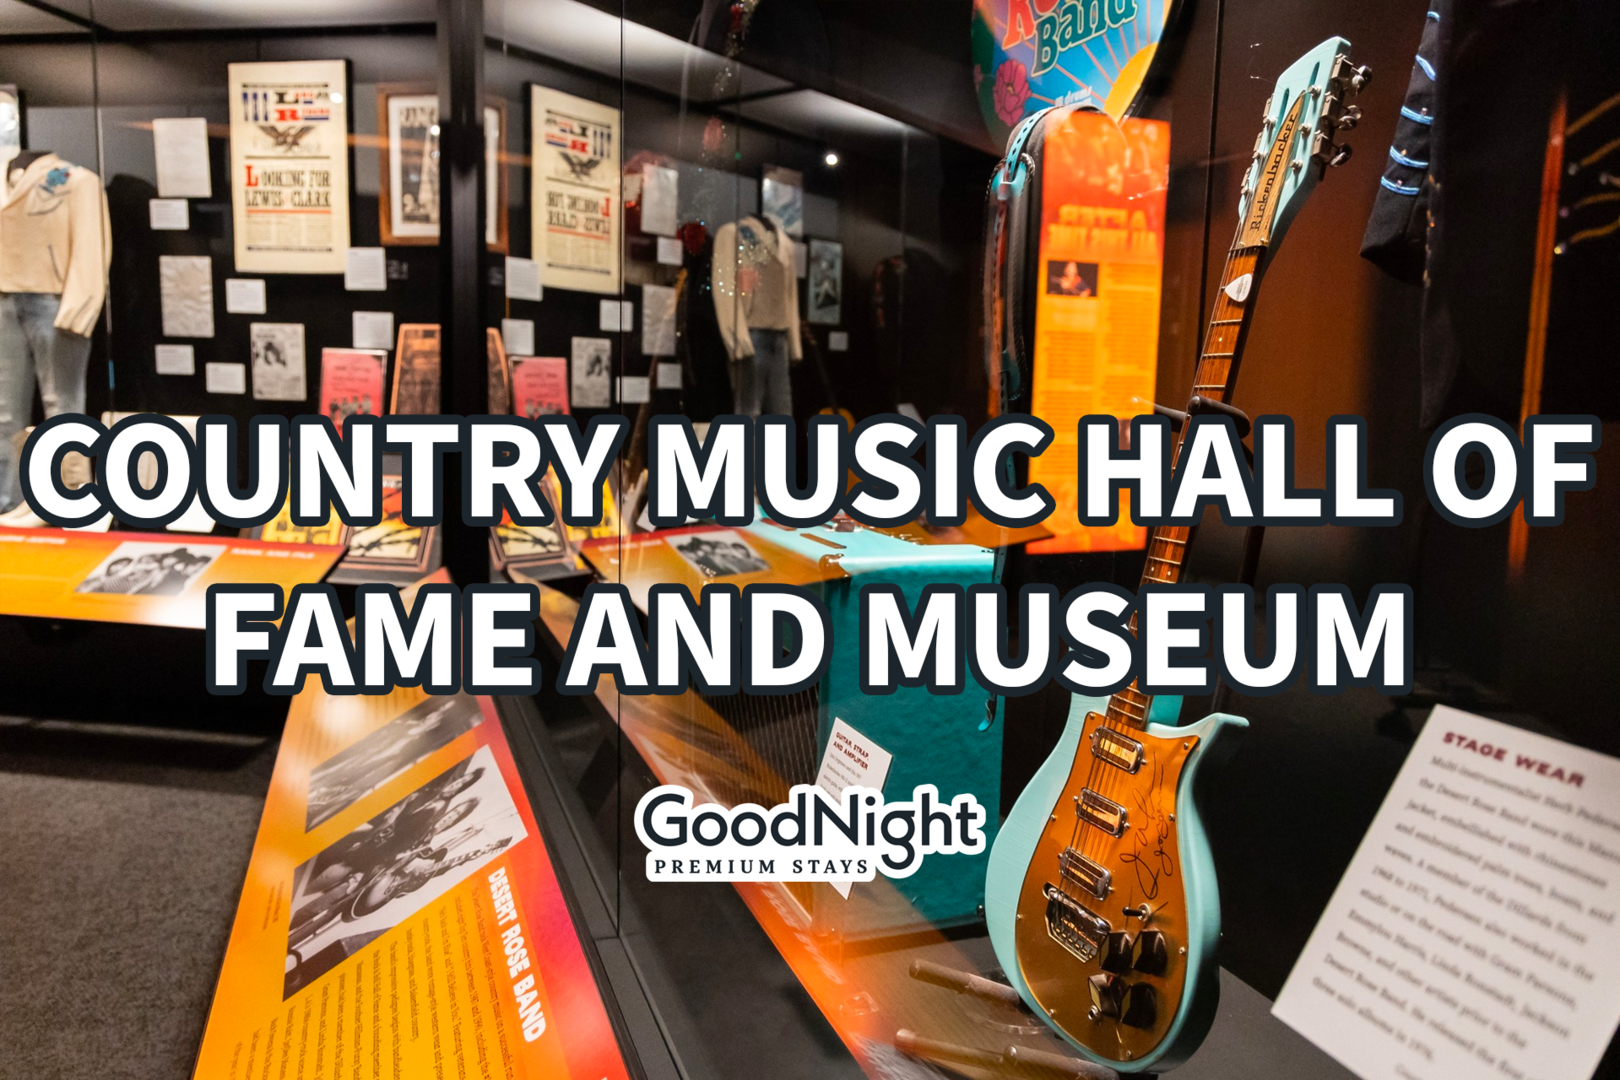 8 mins: Country Music Hall of Fame & Museum